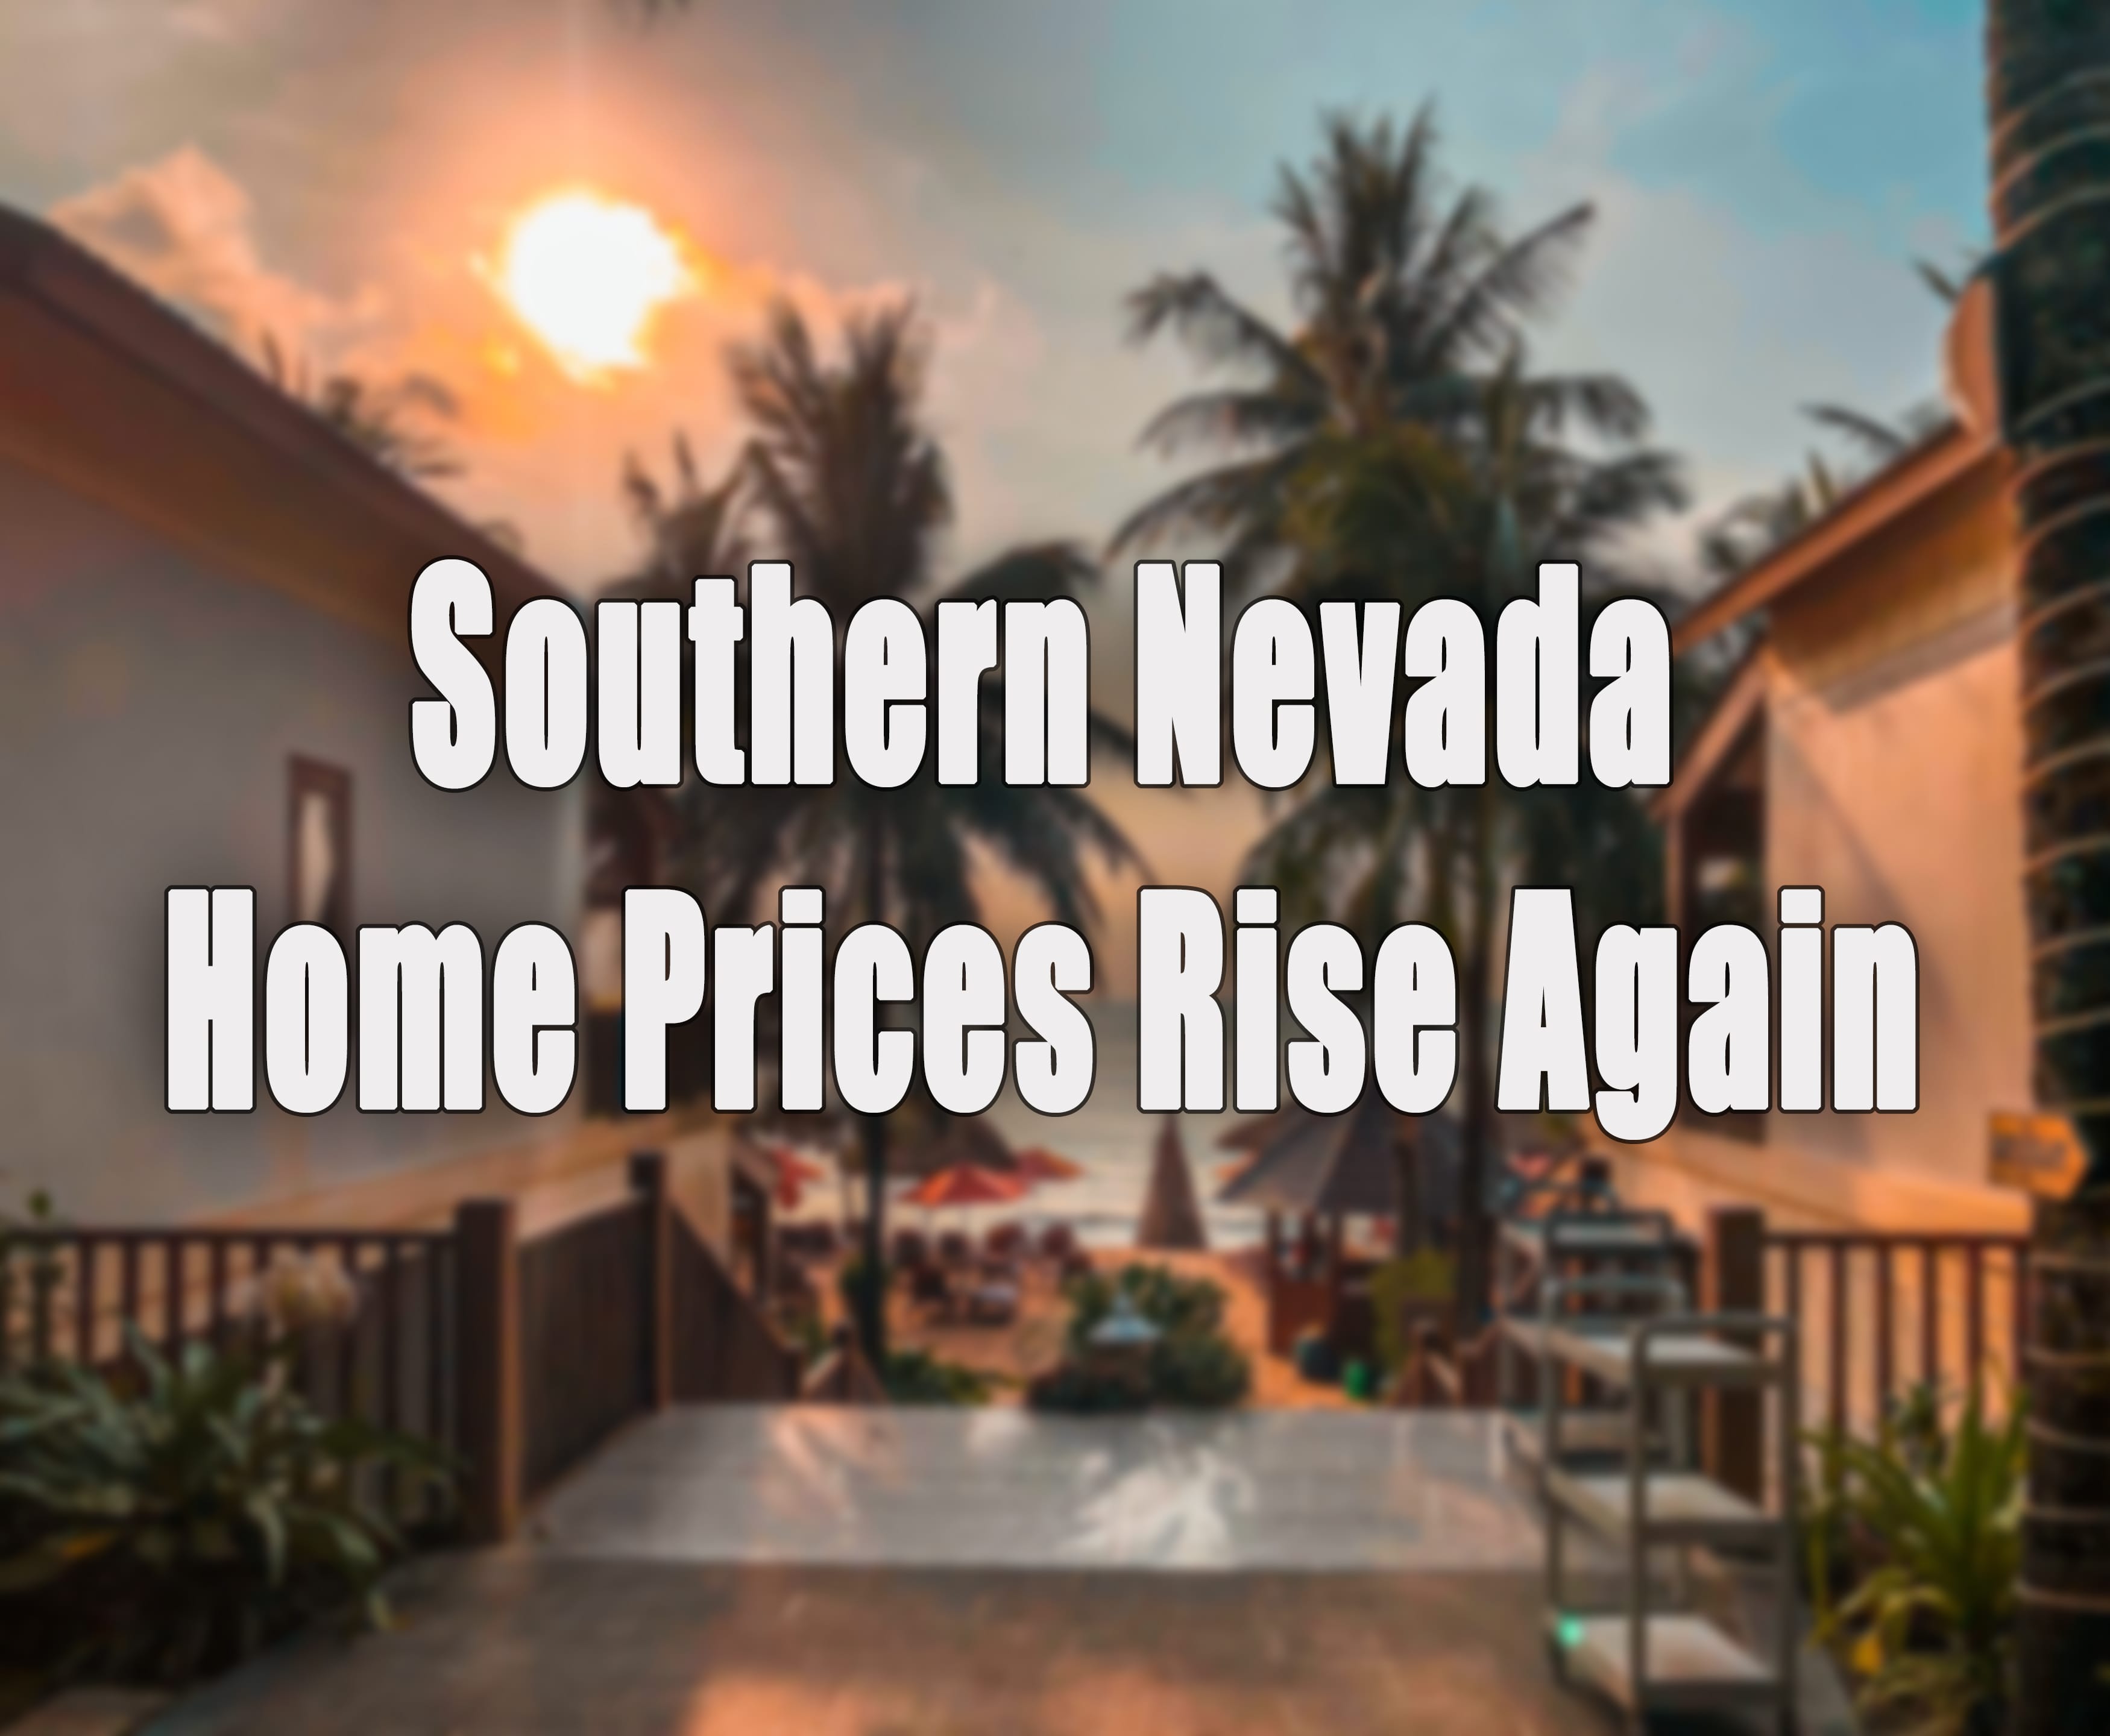 Southern Nevada Home Prices Rising.jpg